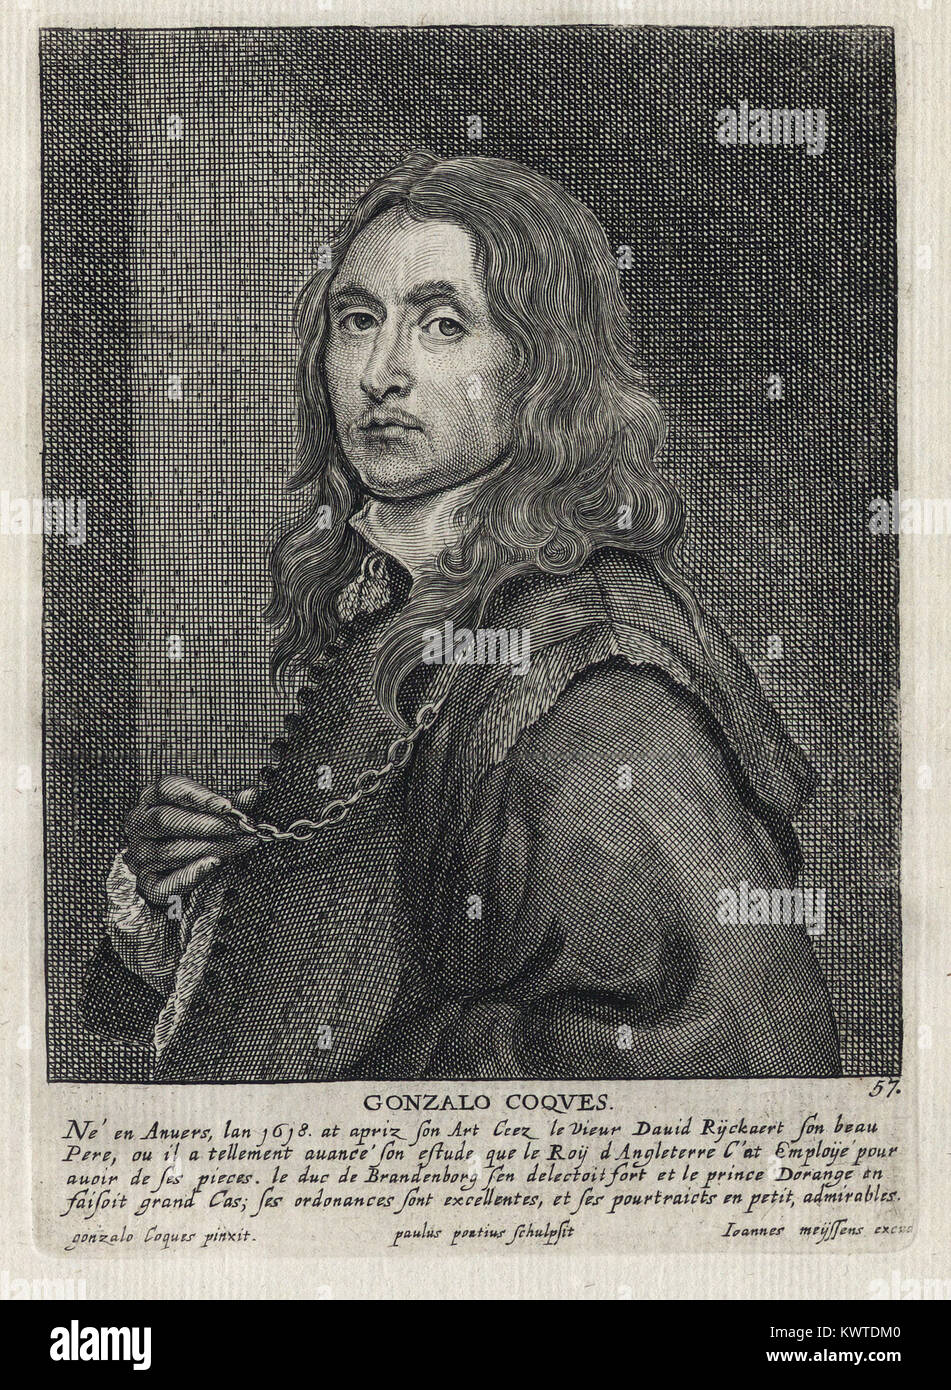 GONZALO COQUES - Woodcut portrait and short biography (old french language) - Engraving 17th century Stock Photo